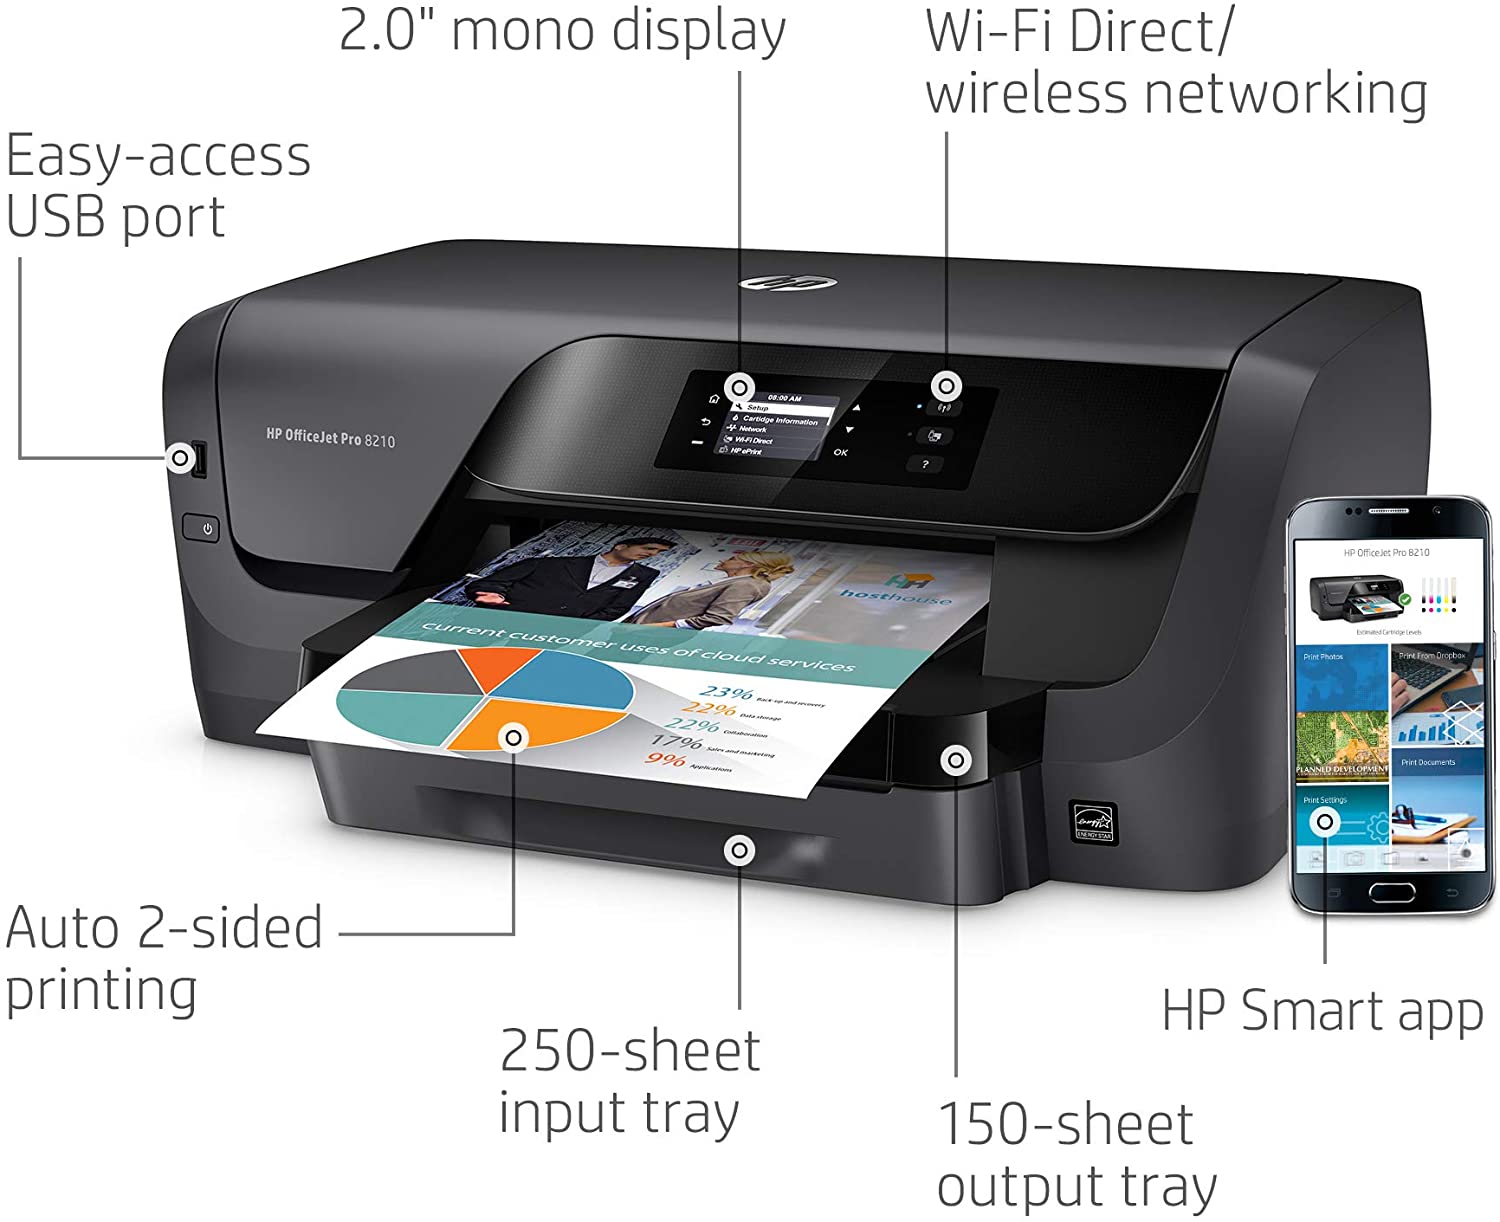 HP OfficeJet Pro 8210 Wireless Color Printer, HP Instant Ink Ready (D9L64A#B1H)